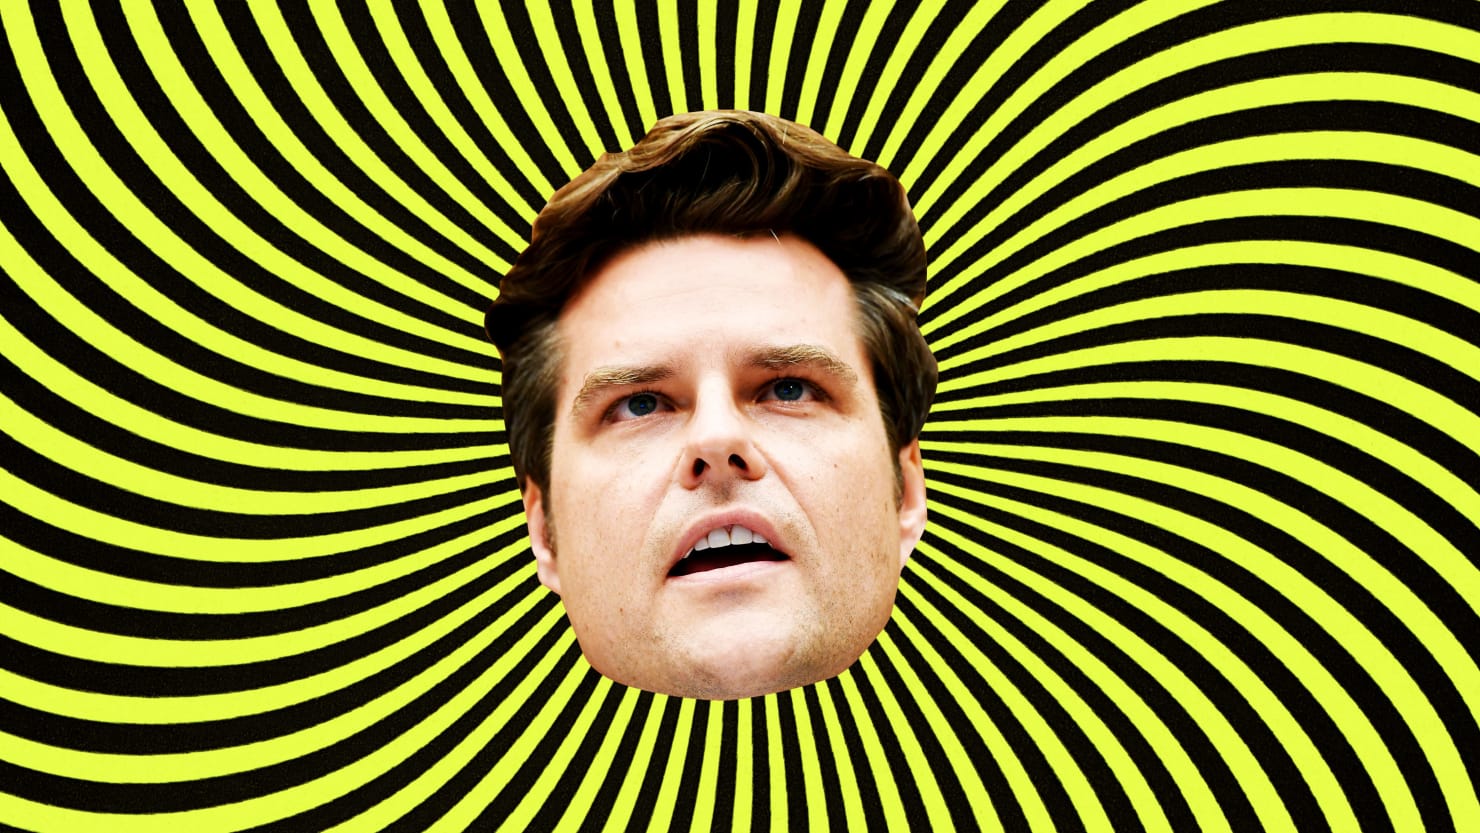 The new documents show the Matt Gaetz campaign in full damage control mode